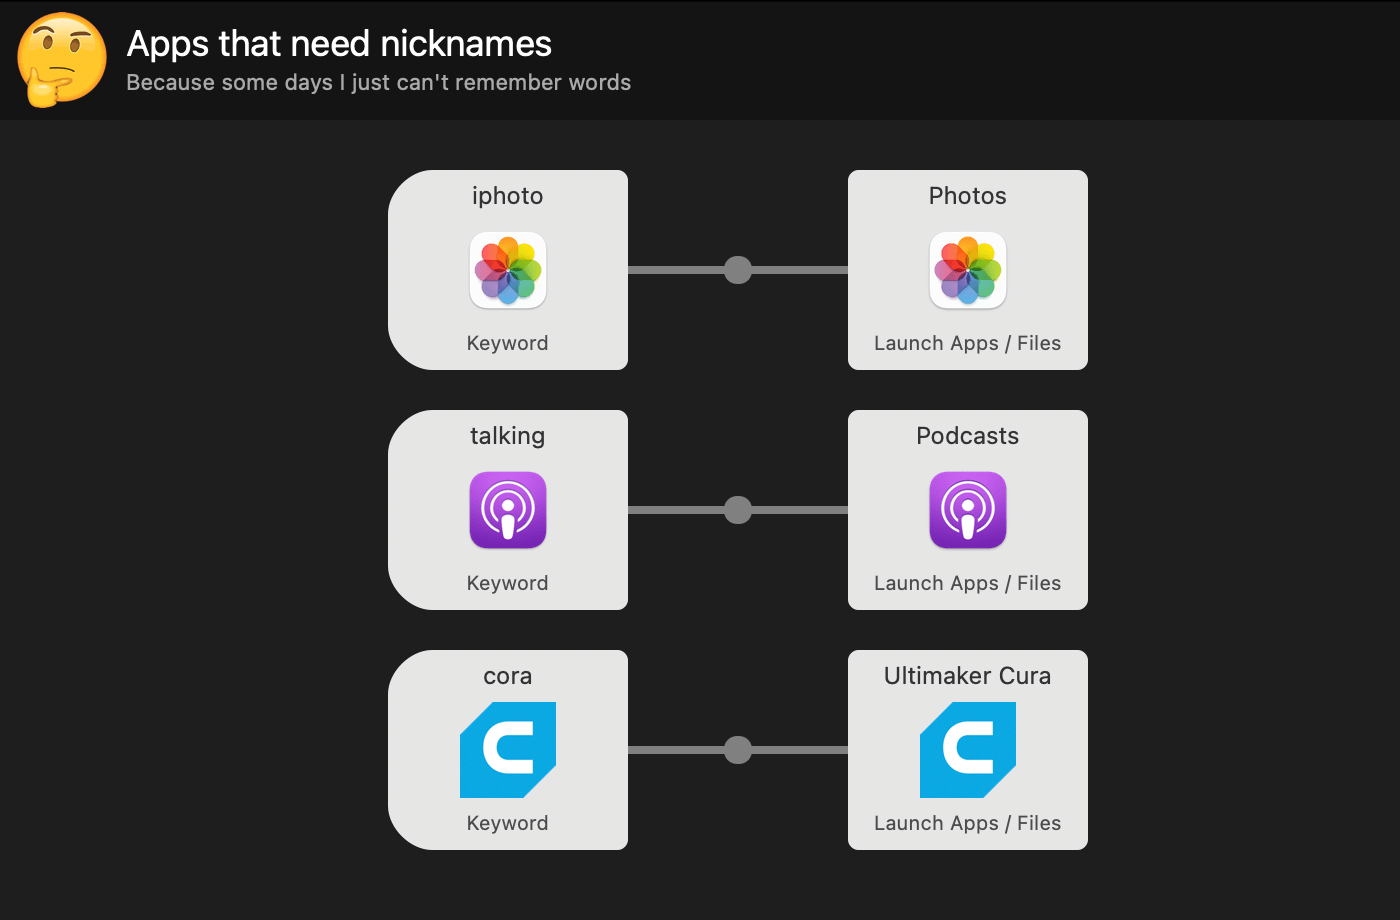 Keywords to launch an app or file with a nickname